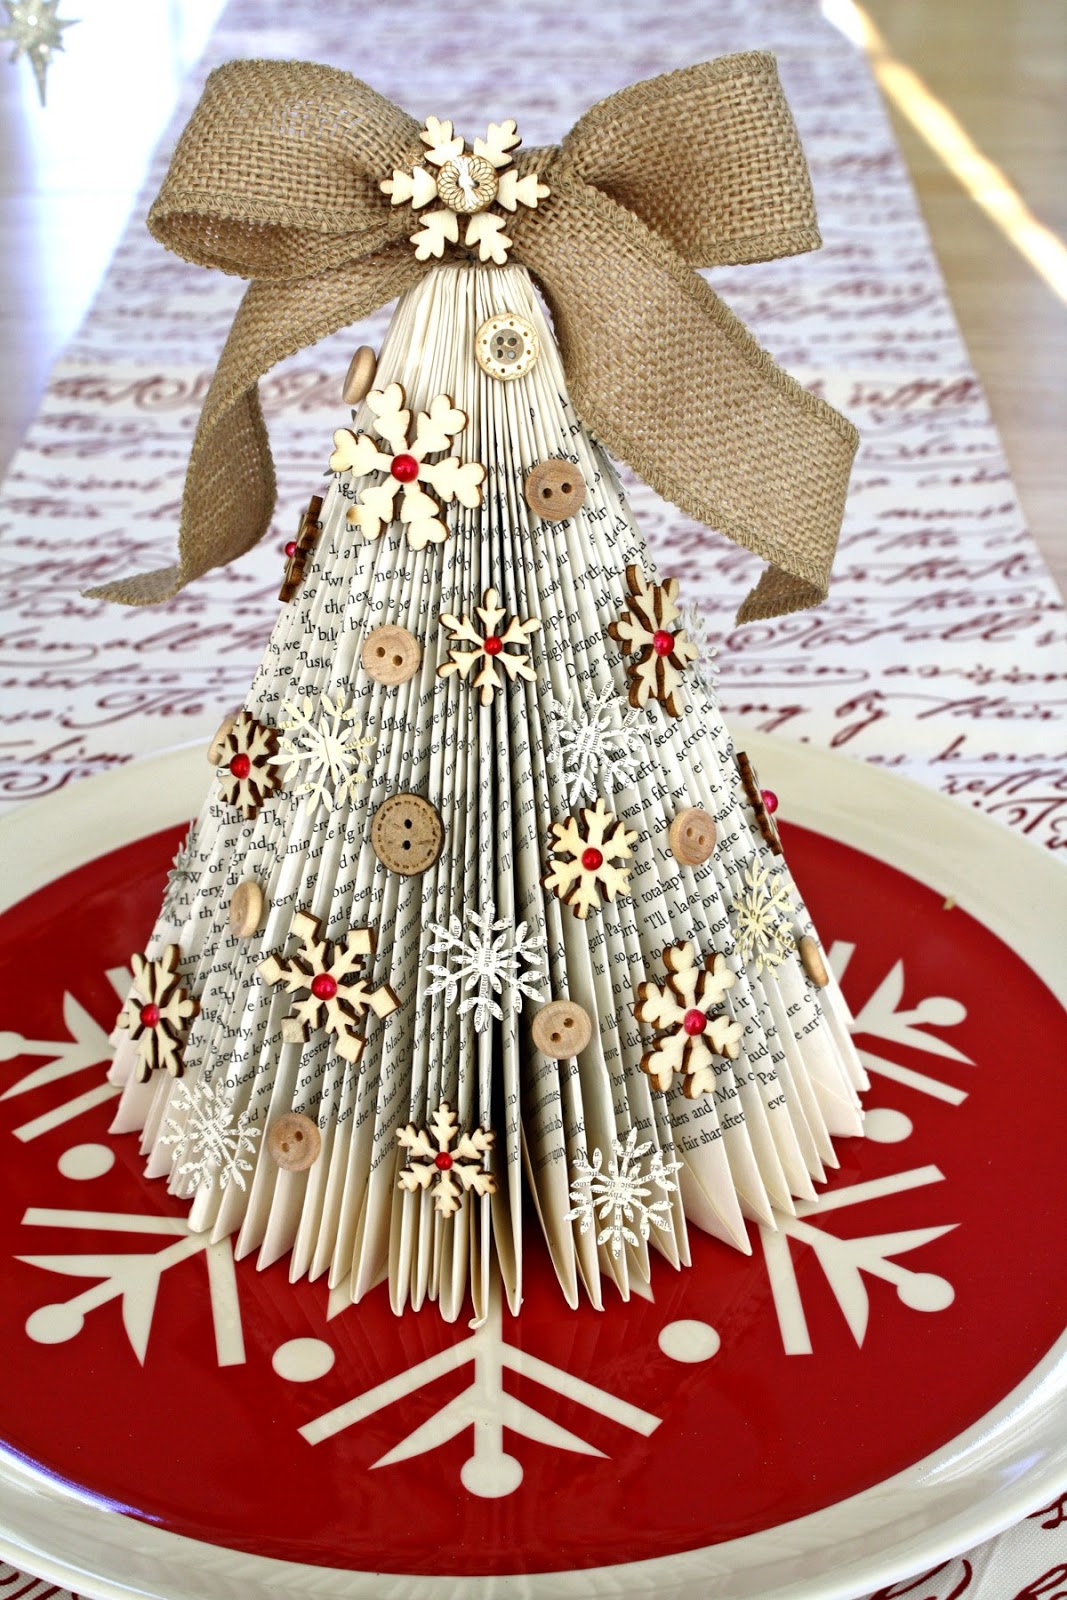 CREATIVELY RECYCLING: RECYCLED CHRISTMAS